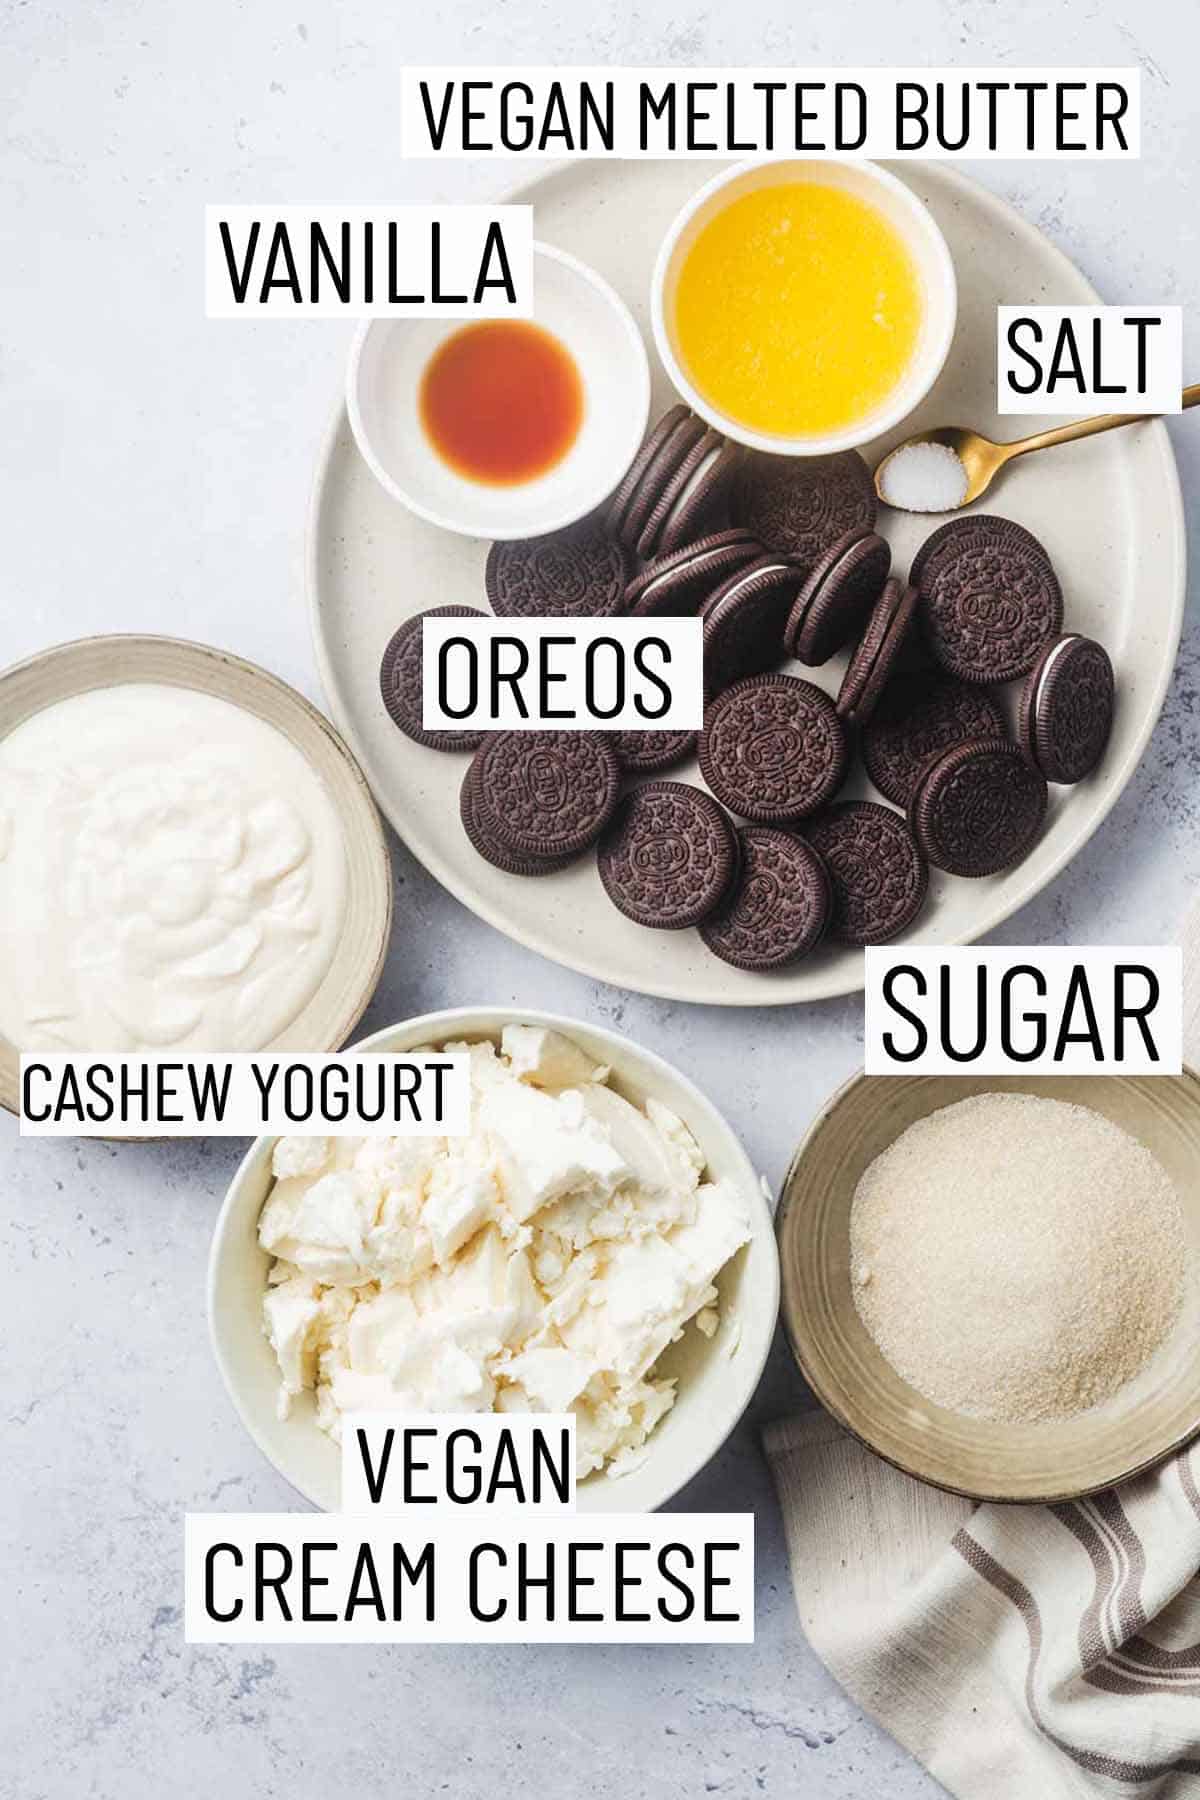 Flat lay image of recipe ingredients including sugar, cream cheese, cashew yogurt, Oreos, salt, melted butter, and maple syrup.